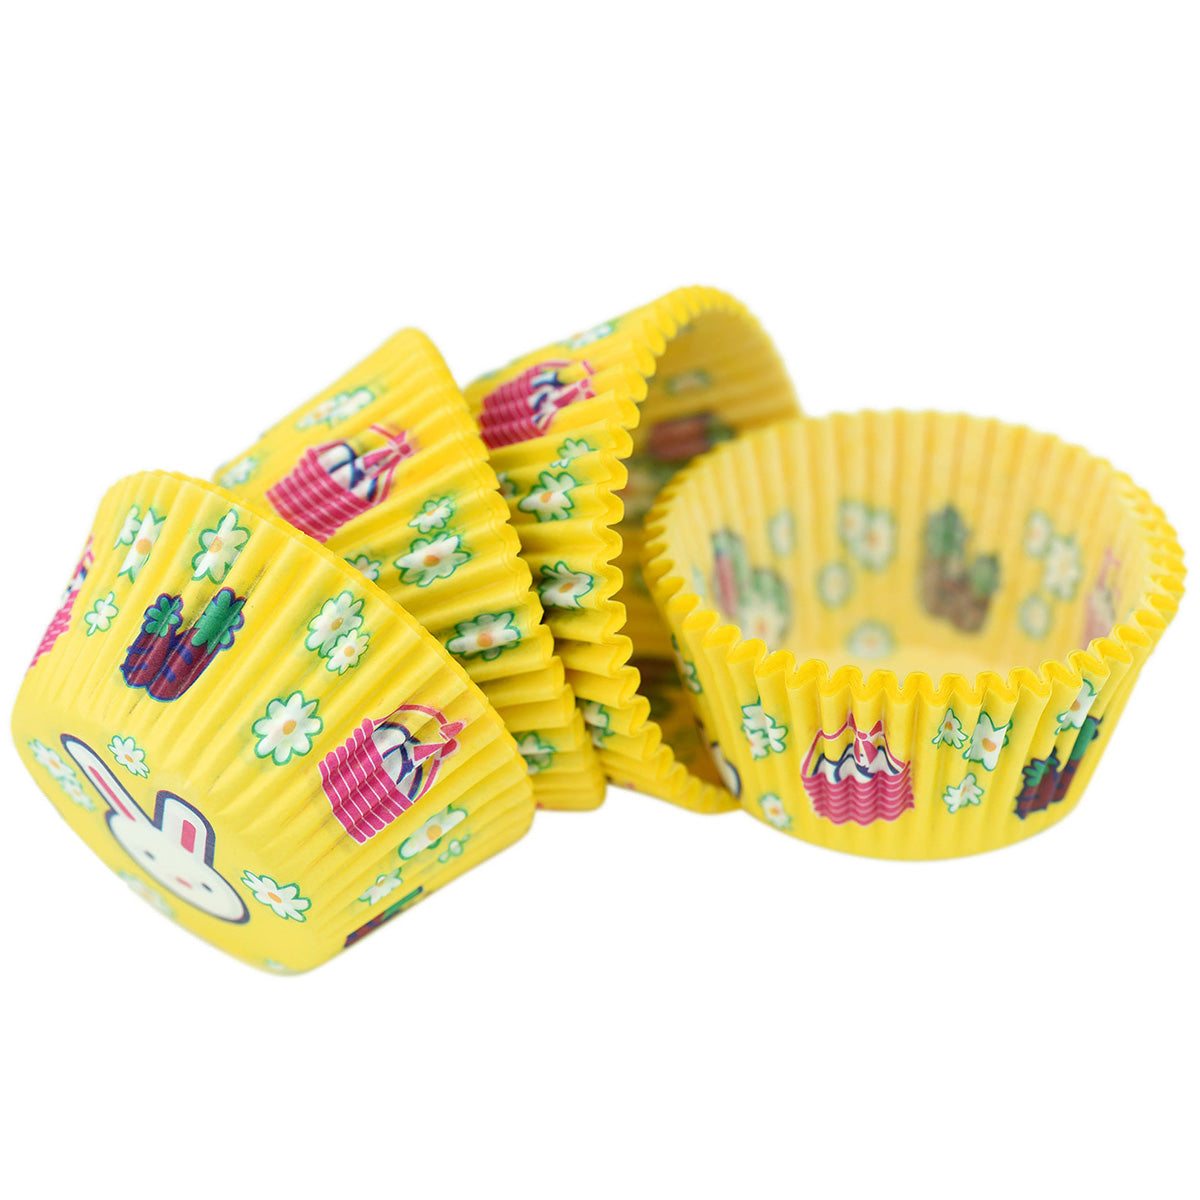 FiveSeasonStuff 100-Pack Cupcake Muffin Baking Paper Cases Liners Style 16